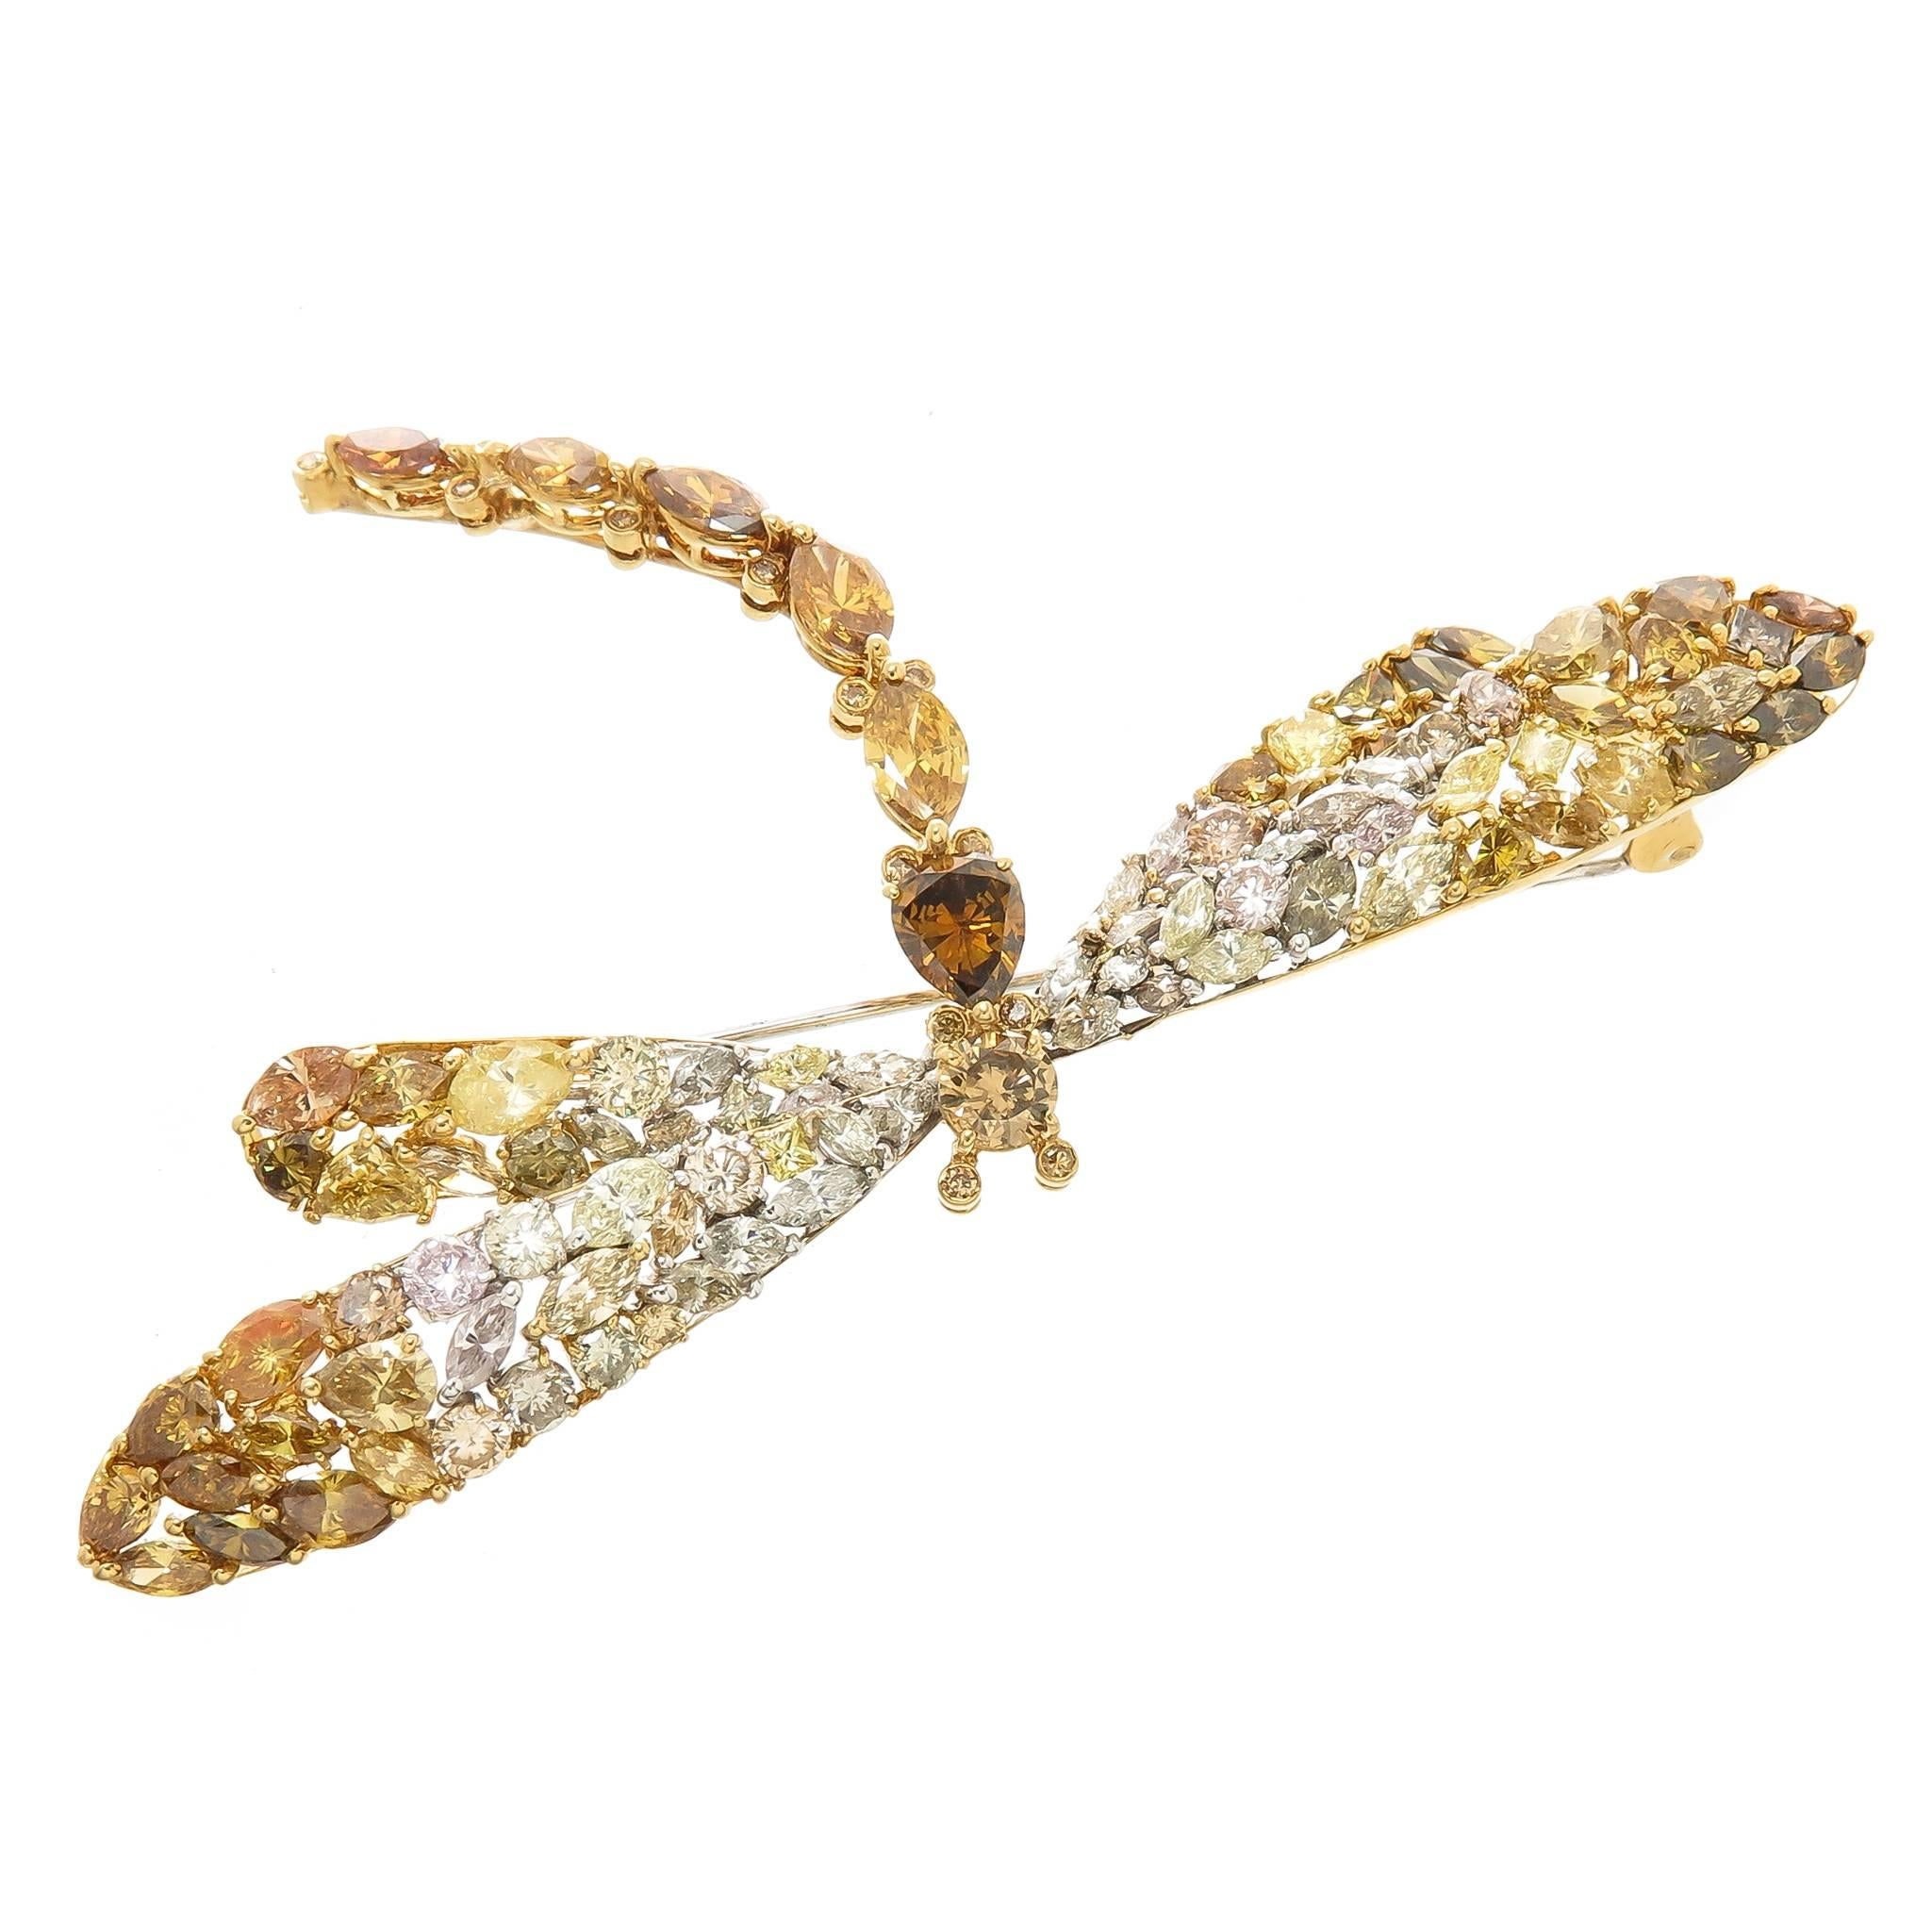 Circa 1990s Dragon Fly brooch set with 10 Carats of Natural Fancy Color Diamonds of Round, Pear and Marquise Shapes and being, Cognac, Yellow, Orange, Green and Light Pink in color. The brooch measures 3 1/8 inch wing tip to tip.  